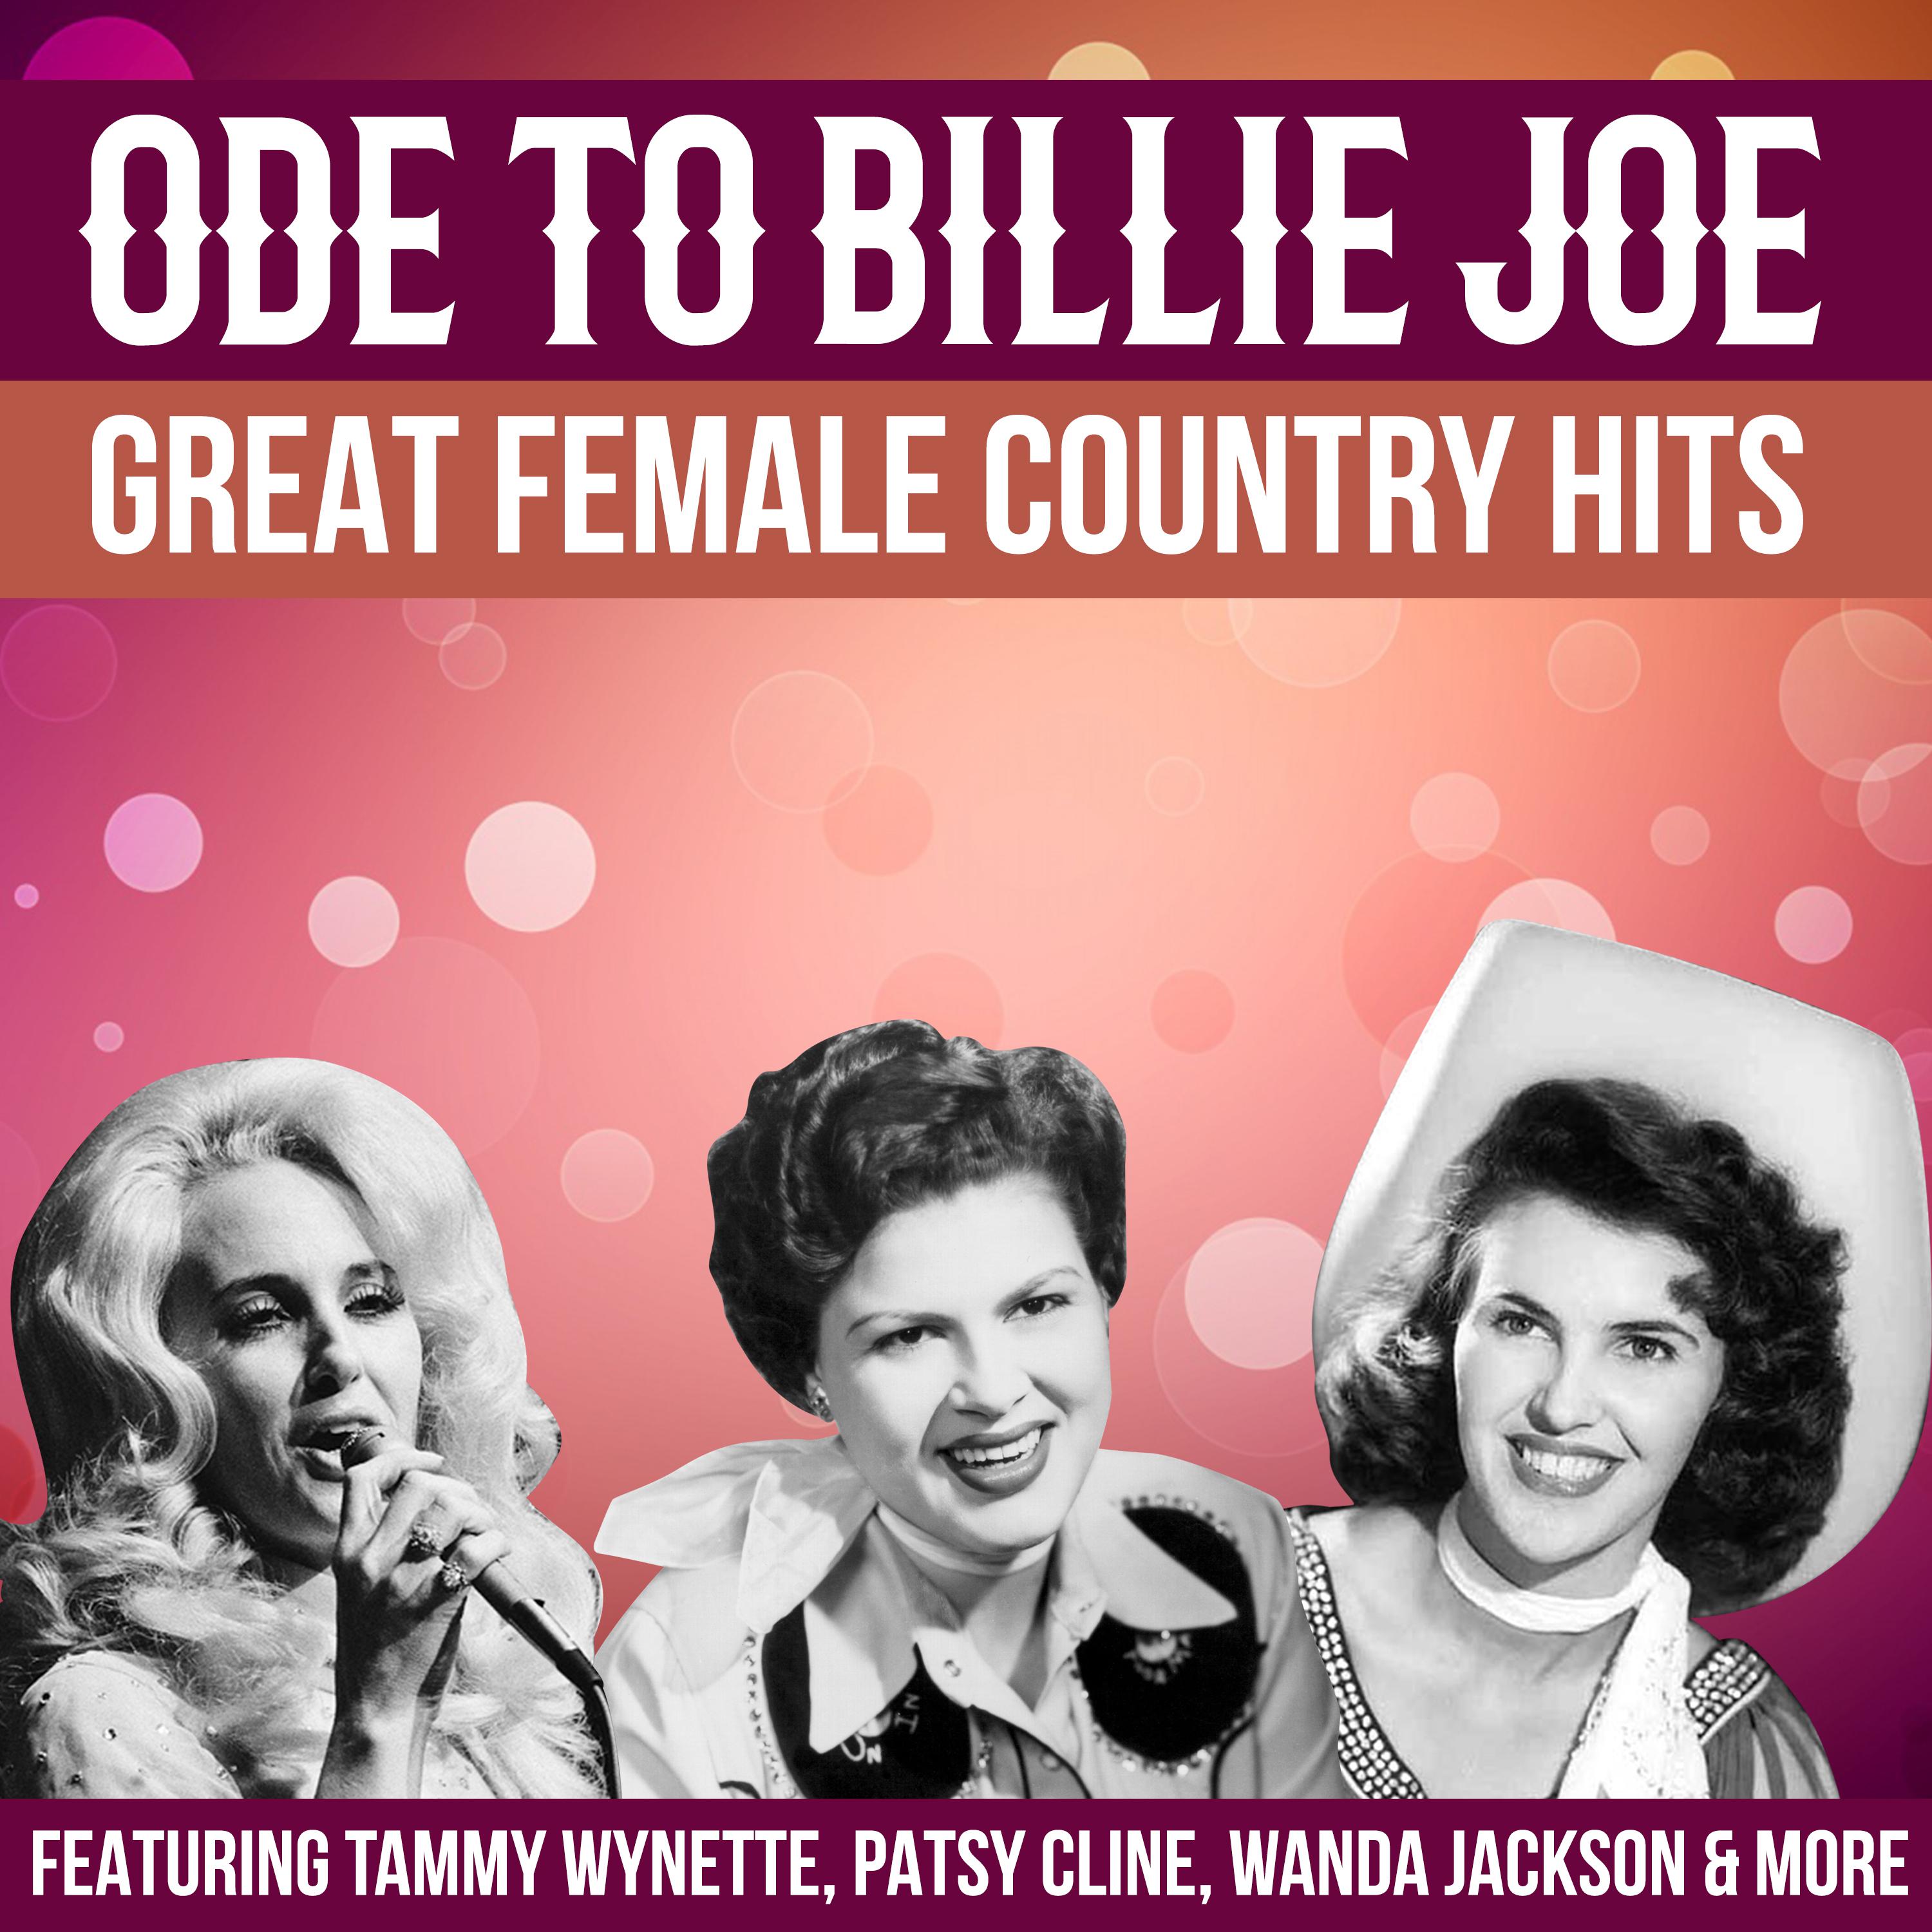 Ode To Billie Joe - Great Female Country Hits